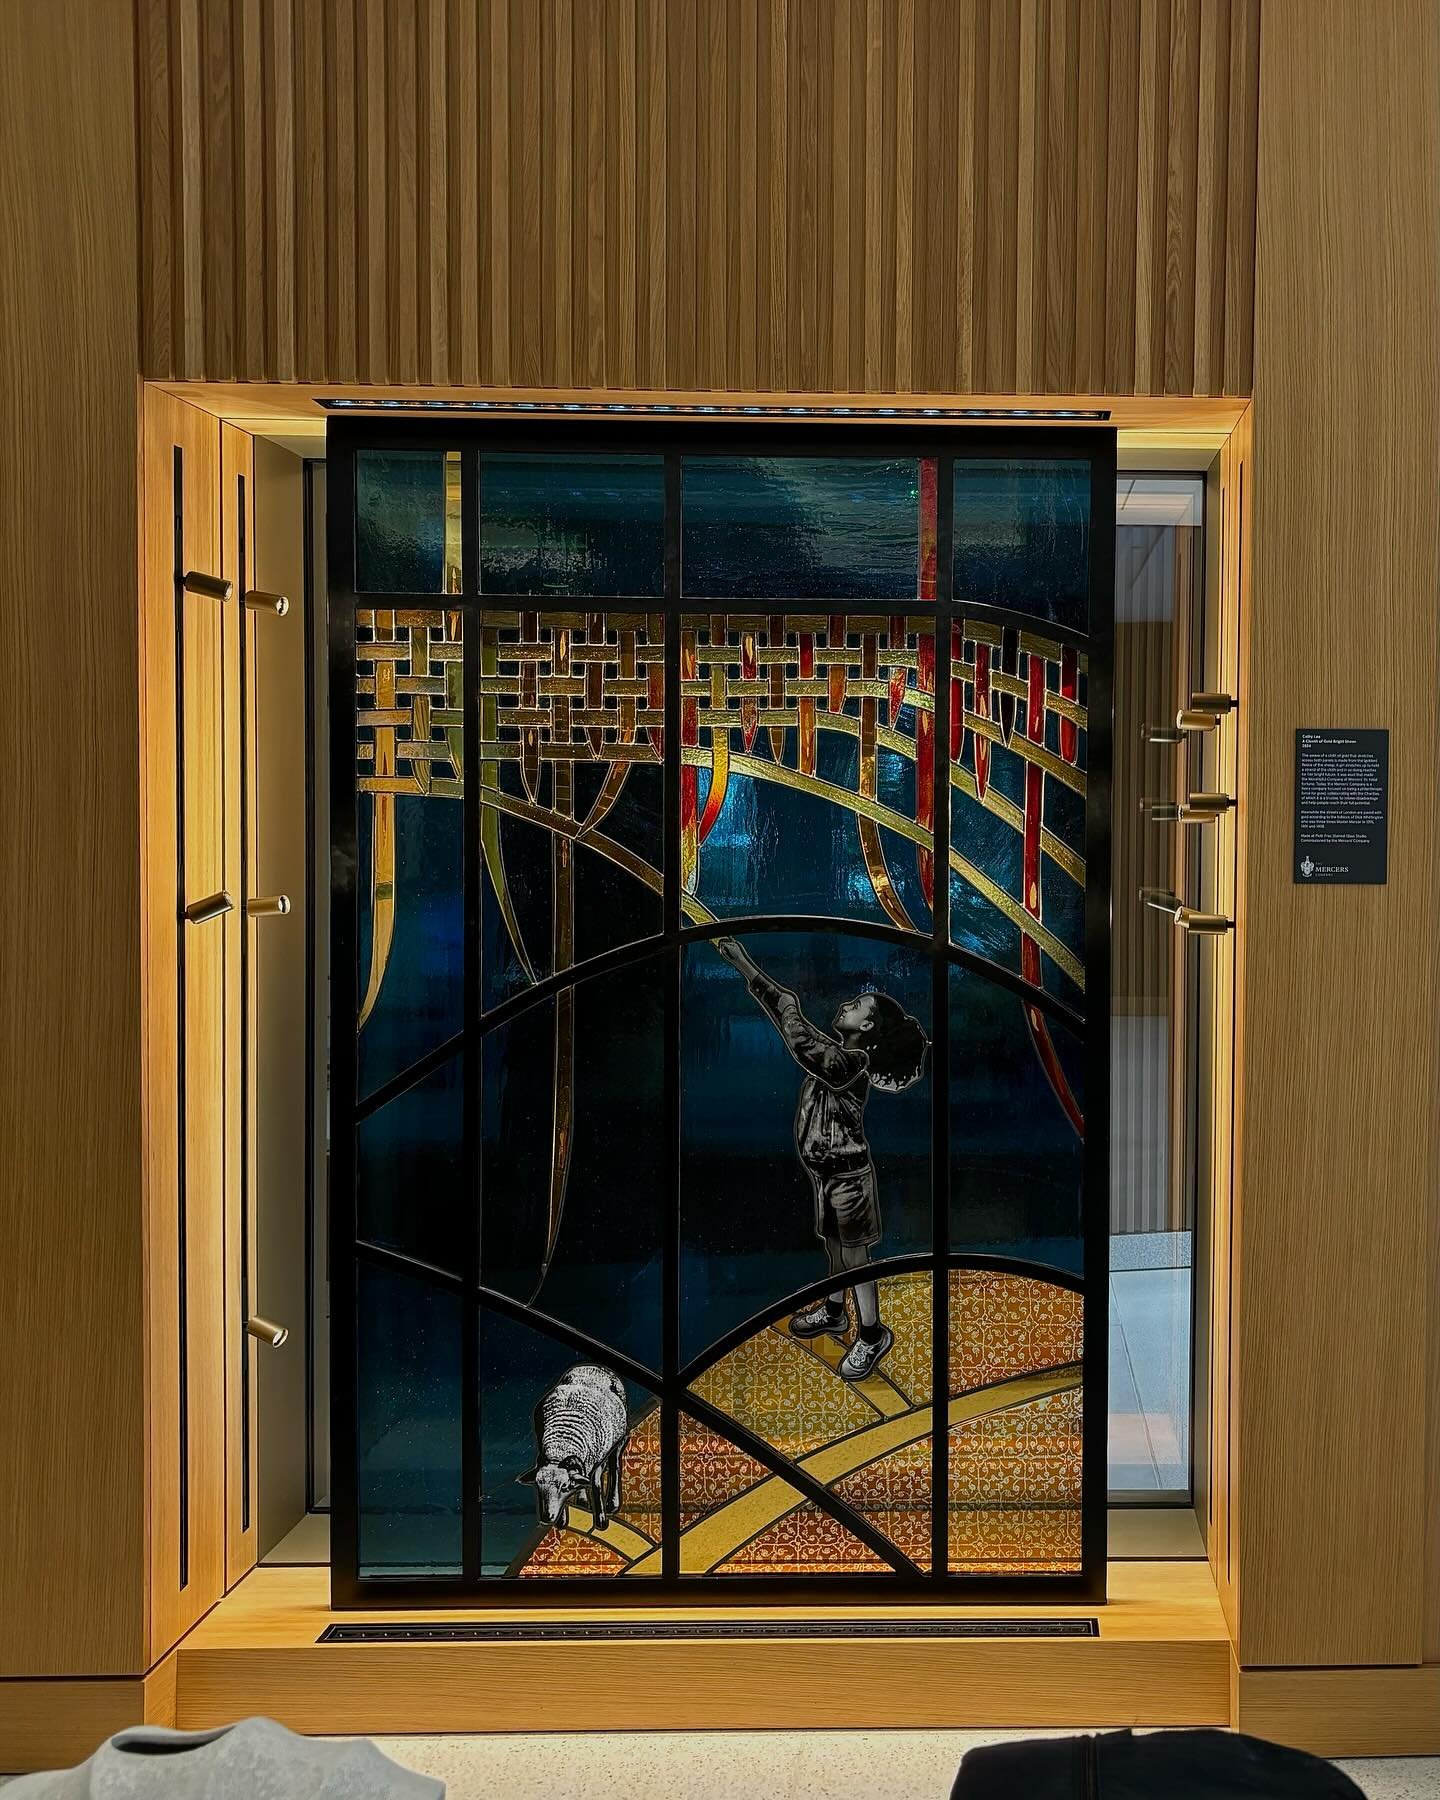 A fun day commissioning the lighting for a stained- glass window installation located in a brand-new office lobby in #moorgate. We worked closely with the artist, and client to create a concept which showcased the beauty of the hand-made glass. #dyna